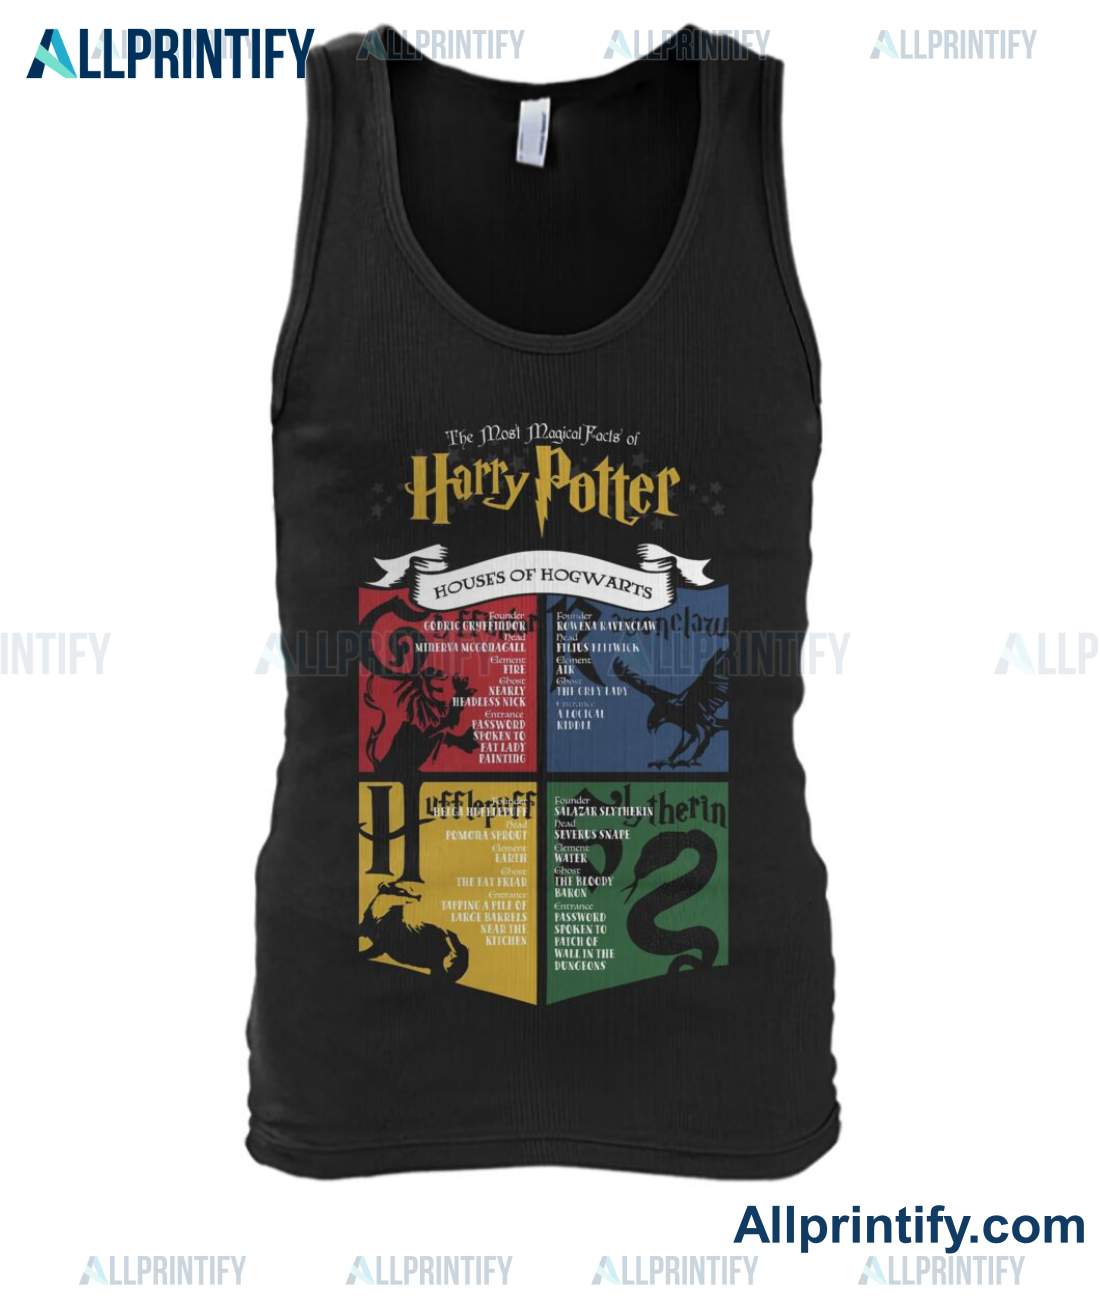 The Most Magical Facts Of Harry Potter Houses Of Hogwarts Shirt c